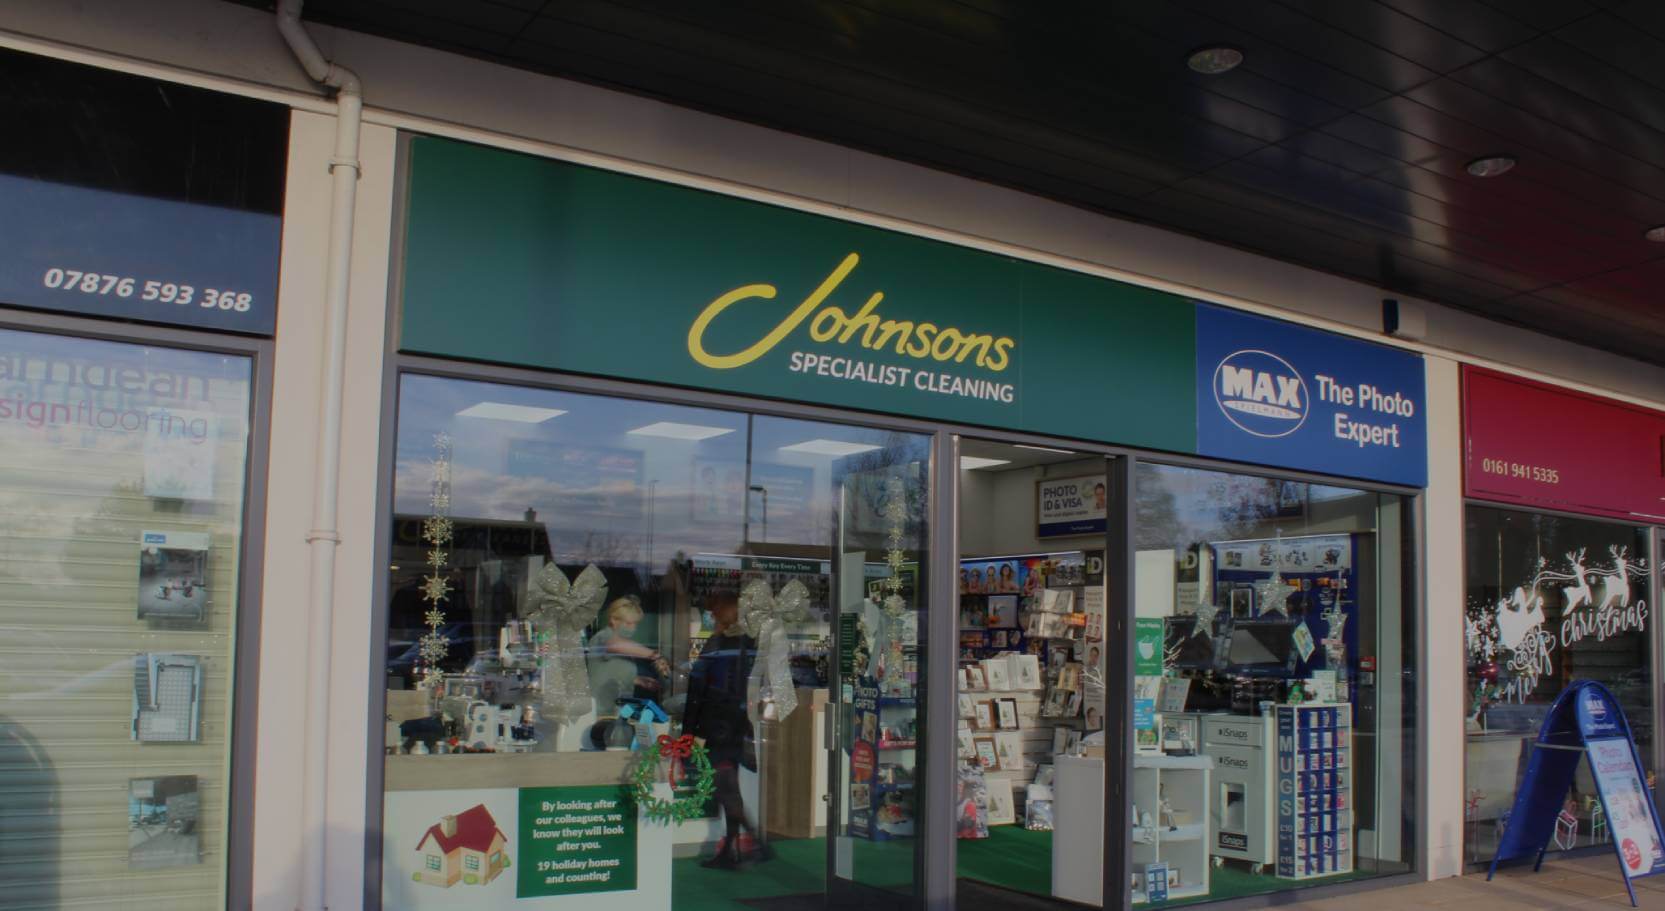 Johnsons Dry Cleaning Jobs